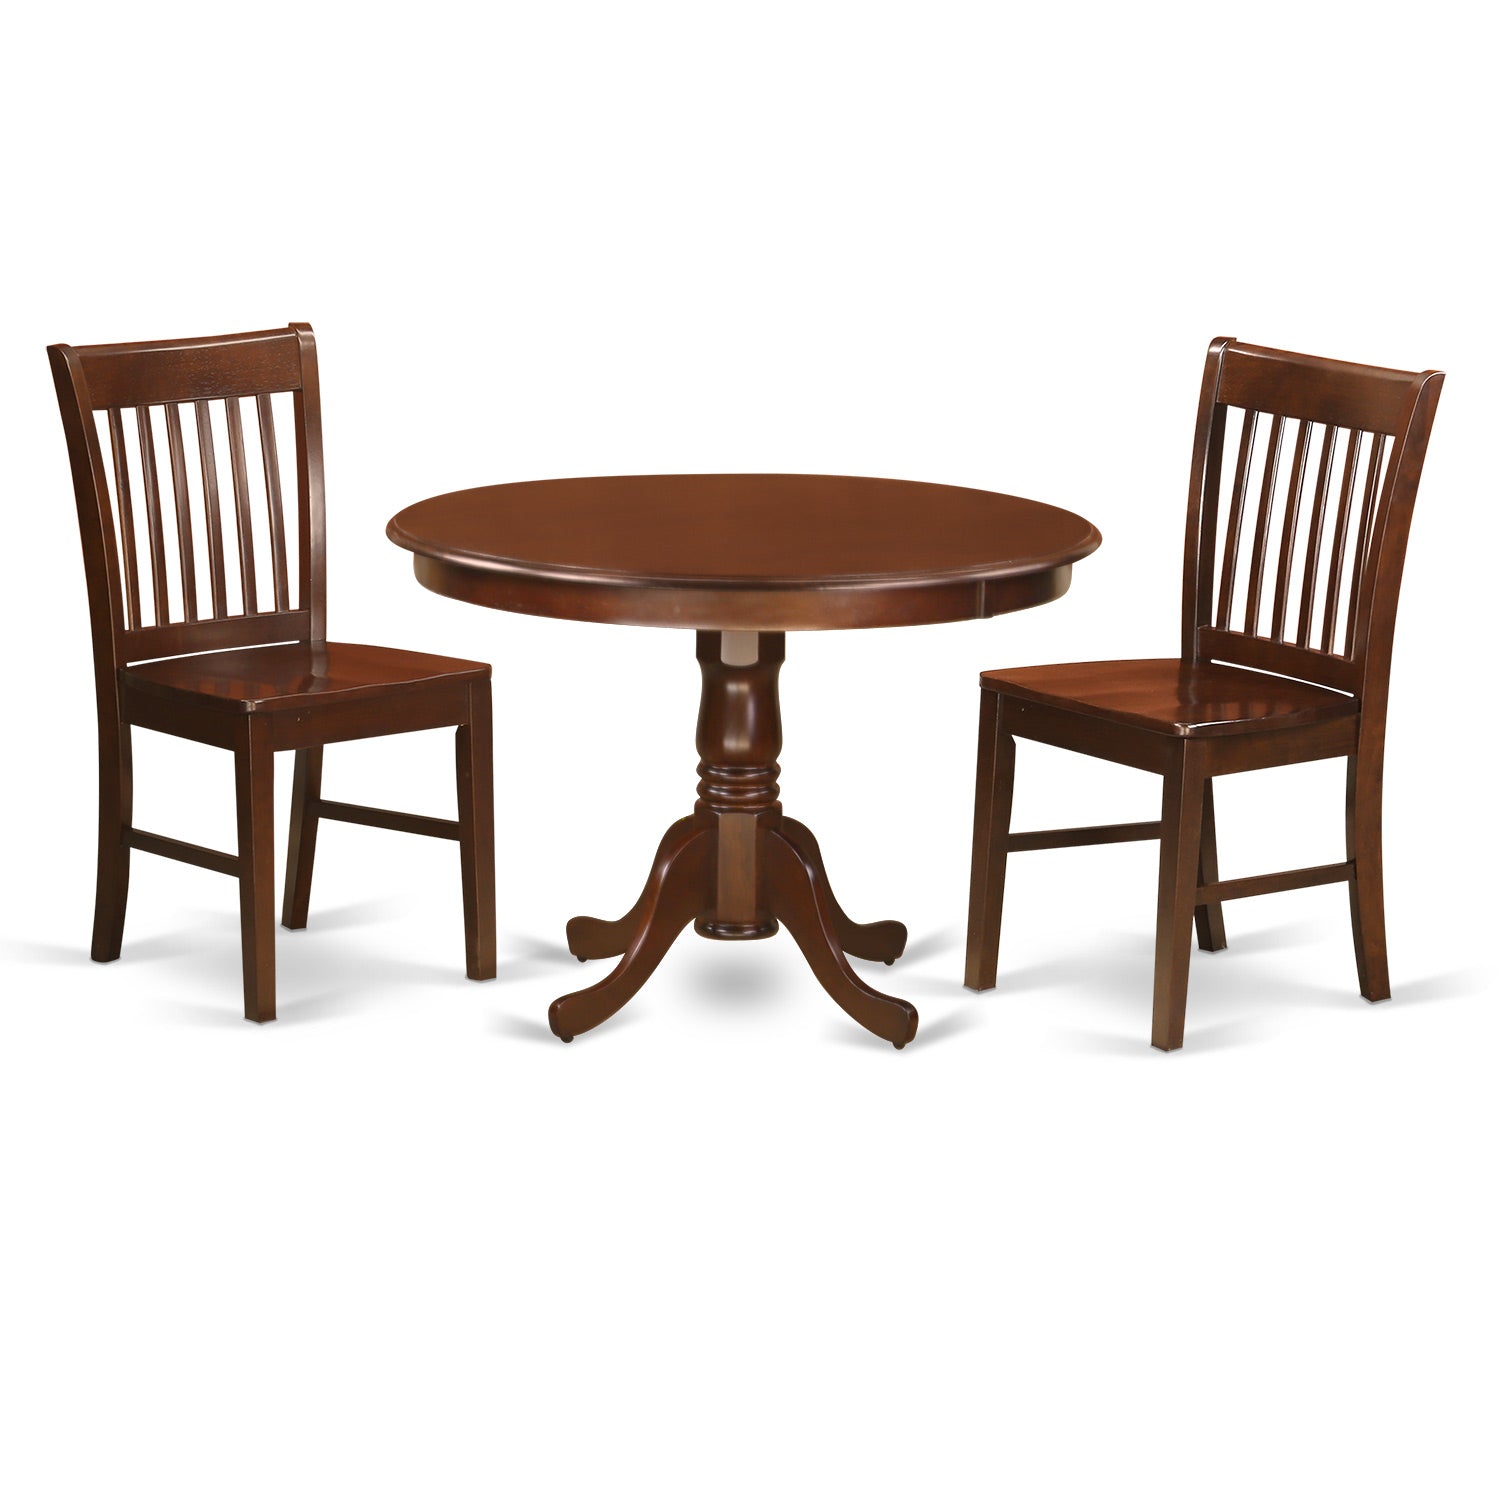 HLNO3-MAH-W 3 Pc set with a Round Kitchen Table and 2 Wood Dinette Chairs in Mahogany